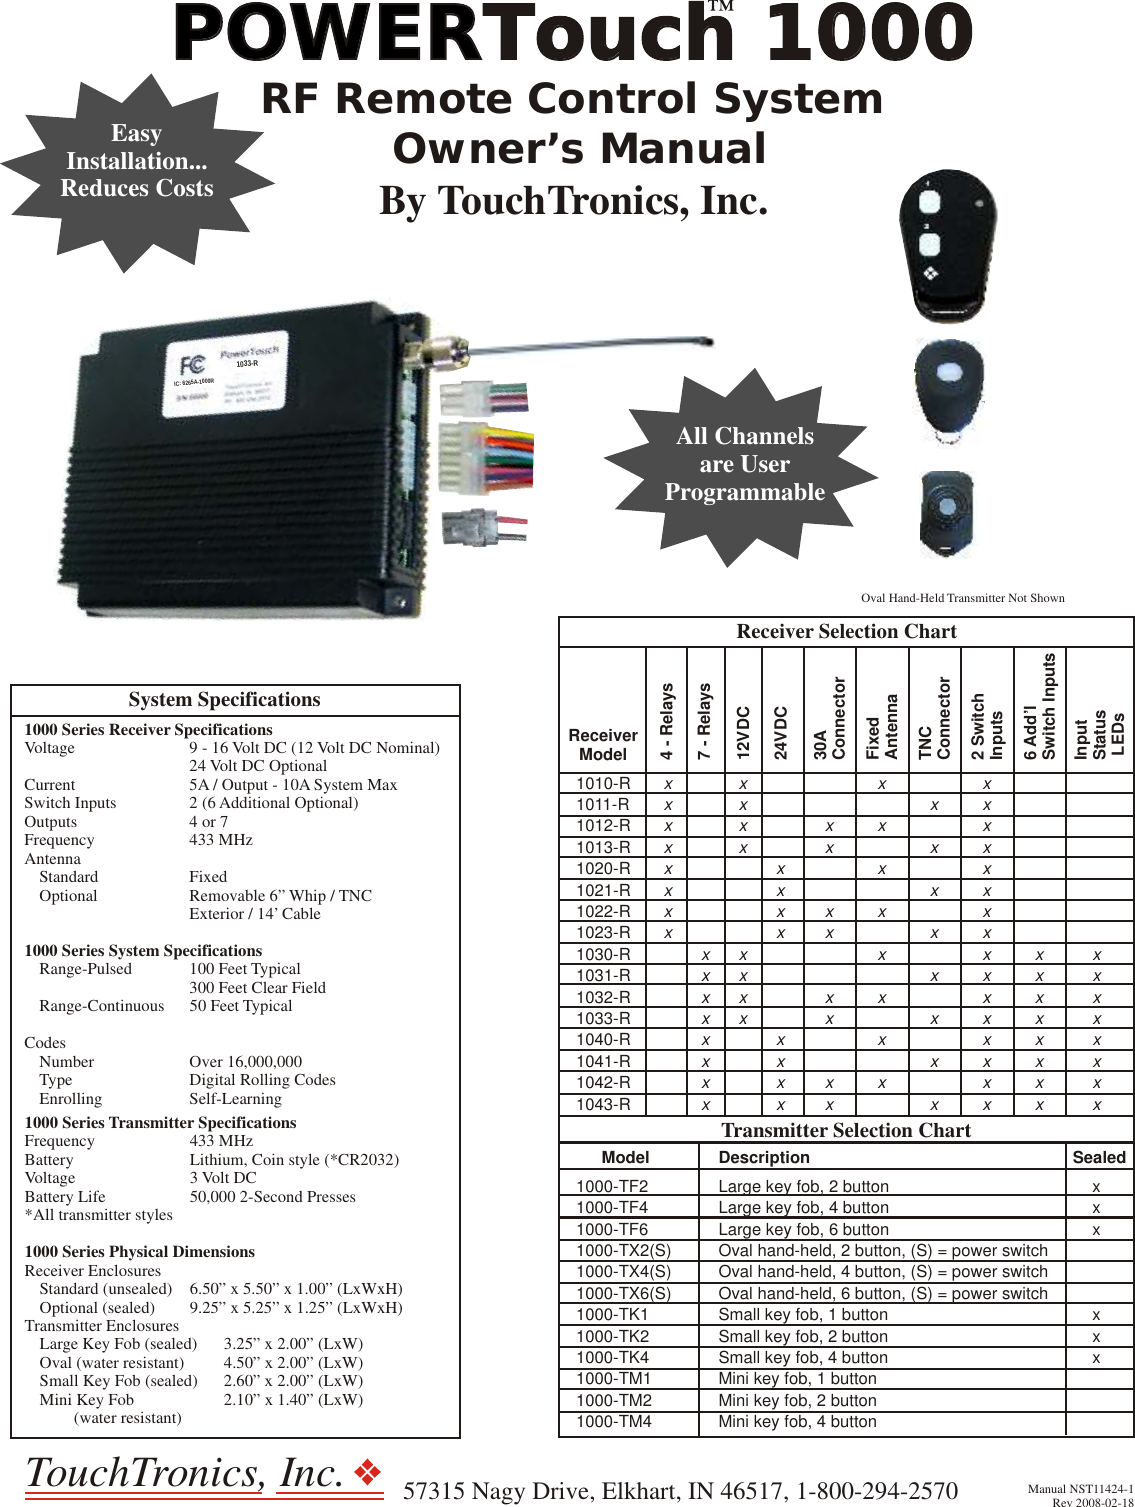 RF Remote Control System Owner’s ManualPOWERTouch 1000POWERTouch 1000By TouchTronics, Inc.EasyInstallation...Reduces Costs1010-R1011-R1012-R1013-R1020-R1021-R1022-R1023-R1030-R1031-R1032-R1033-R1040-R1041-R1042-R1043-RReceiverModelxxxxxxxx4 - Relaysxxxxxxxx7 - Relaysxxxxxxxx12VDCxxxxxxxx24VDCxxxxxxxx30AConnectorxxxxxxxxFixedAntennaxxxxxxxxTNCConnectorxxxxxxxxxxxxxxxx2 SwitchInputsxxxxxxxx6 Add’l Switch InputsxxxxxxxxInputStatus LEDs1000-TF21000-TF41000-TF61000-TX2(S)1000-TX4(S)1000-TX6(S)1000-TK11000-TK21000-TK41000-TM11000-TM21000-TM4Receiver Selection ChartTransmitter Selection ChartModelLarge key fob, 2 buttonLarge key fob, 4 buttonLarge key fob, 6 buttonOval hand-held, 2 button, (S) = power switchOval hand-held, 4 button, (S) = power switchOval hand-held, 6 button, (S) = power switchSmall key fob, 1 buttonSmall key fob, 2 buttonSmall key fob, 4 buttonMini key fob, 1 buttonMini key fob, 2 buttonMini key fob, 4 button1000 Series Receiver SpecificationsVoltage                           9 - 16 Volt DC (12 Volt DC Nominal)                                      24 Volt DC OptionalCurrent                           5A / Output - 10A System MaxSwitch Inputs                 2 (6 Additional Optional)Outputs                          4 or 7Frequency                      433 MHzAntenna                     Standard                     Fixed   Optional                     Removable 6” Whip / TNC                                       Exterior / 14’ Cable1000 Series System Specifications   Range-Pulsed             100 Feet Typical                                      300 Feet Clear Field   Range-Continuous      50 Feet TypicalCodes   Number                      Over 16,000,000   Type                           Digital Rolling Codes   Enrolling                    Self-Learning1000 Series Transmitter SpecificationsFrequency                      433 MHzBattery                           Lithium, Coin style (*CR2032)Voltage                           3 Volt DCBattery Life                    50,000 2-Second Presses*All transmitter styles1000 Series Physical DimensionsReceiver Enclosures   Standard (unsealed)    6.50” x 5.50” x 1.00” (LxWxH)   Optional (sealed)        9.25” x 5.25” x 1.25” (LxWxH)Transmitter Enclosures   Large Key Fob (sealed)      3.25” x 2.00” (LxW)   Oval (water resistant)         4.50” x 2.00” (LxW)   Small Key Fob (sealed)      2.60” x 2.00” (LxW)   Mini Key Fob                     2.10” x 1.40” (LxW)           (water resistant)  System SpecificationsManual NST11424-1Rev 2008-02-18TouchTronics, Inc. 57315 Nagy Drive, Elkhart, IN 46517, 1-800-294-2570Description 5A-1 RIC: 626 000133-R0SealedxxxxxxAll Channelsare UserProgrammableOval Hand-Held Transmitter Not Shown